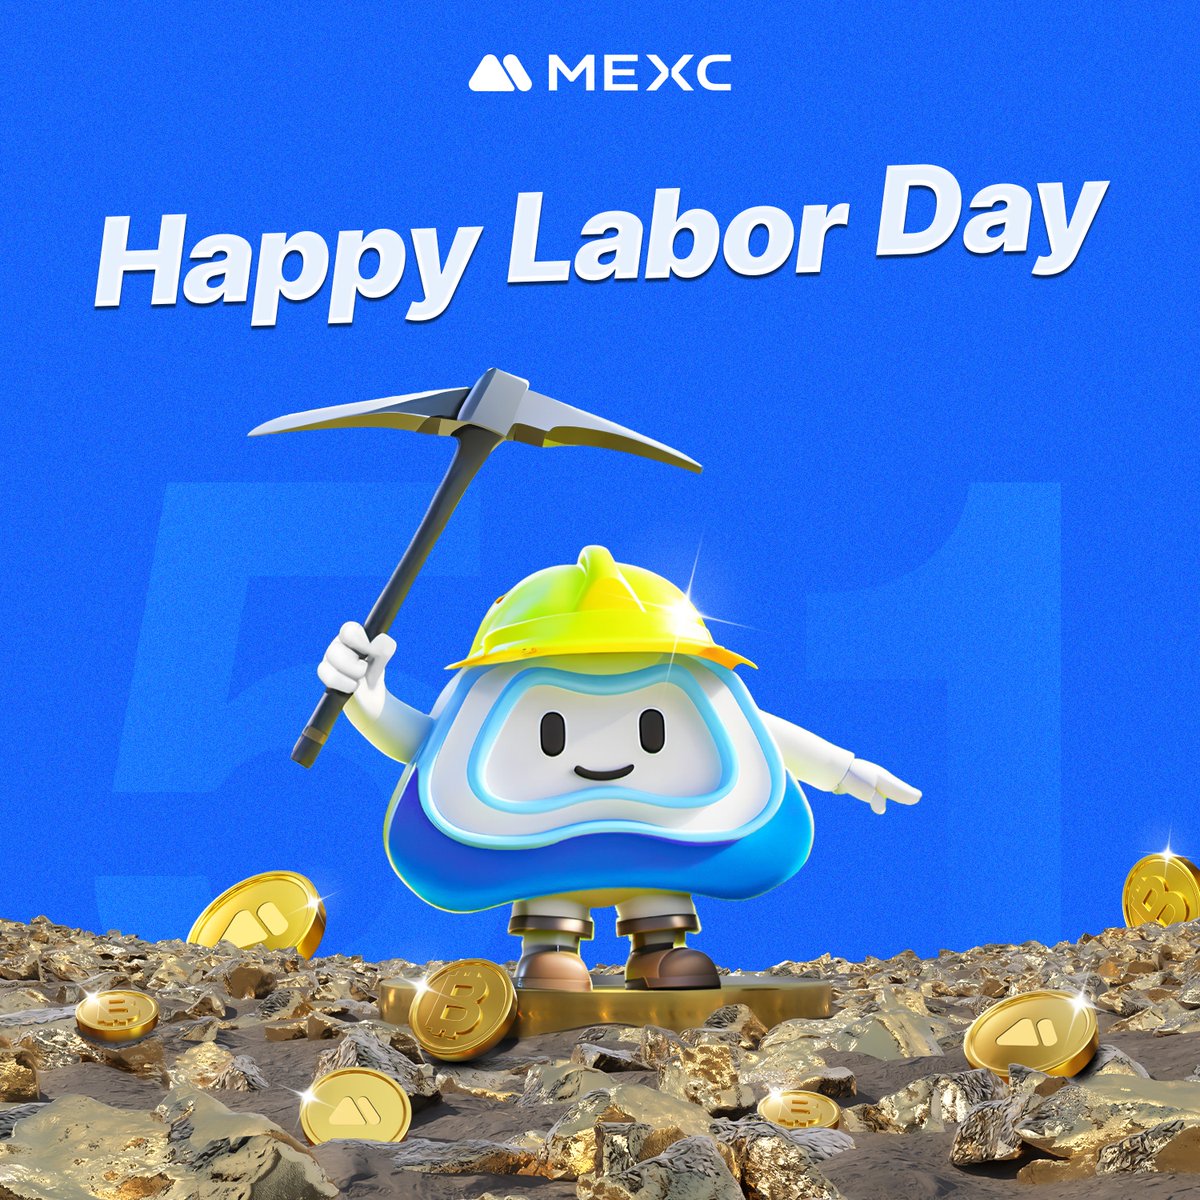 Happy Labor Day from #MEXC! 🎉 Salute to every individual chasing their dreams with determination! 🎊 #LaborDay